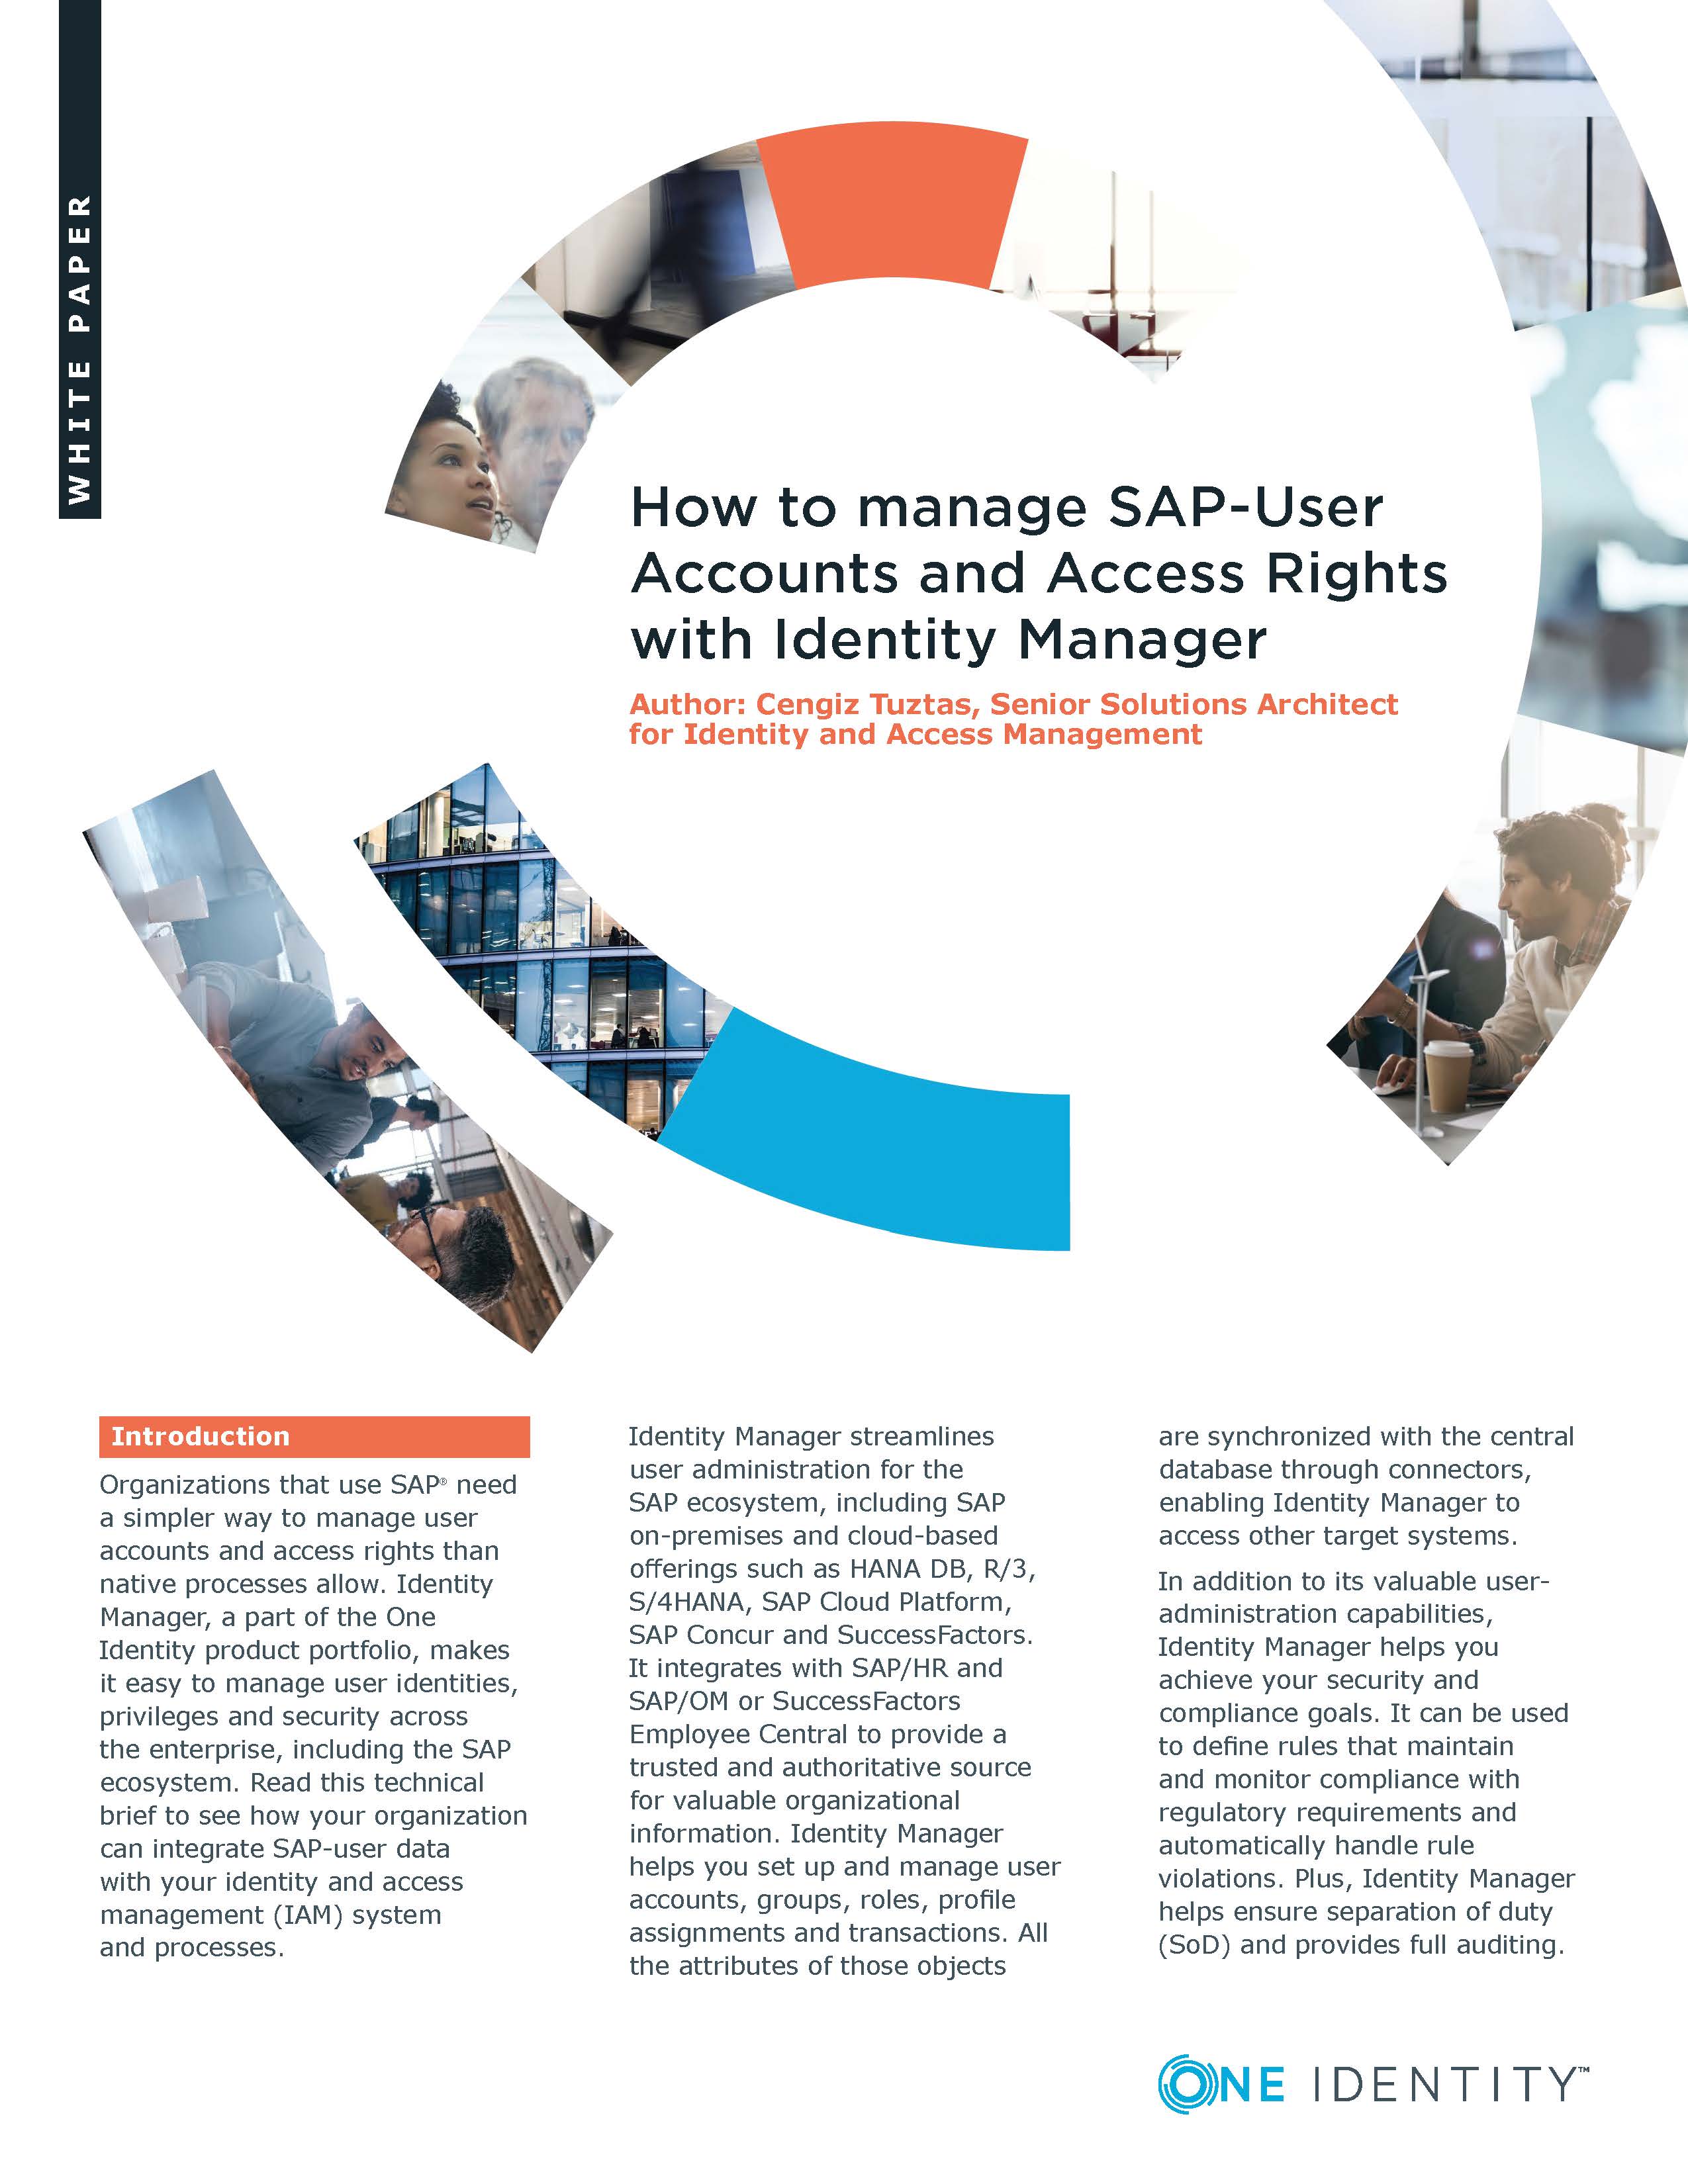 how-to-manage-sap-user-accounts-and-access-rights-with-identity-manager-white-paper-27079_Page_01